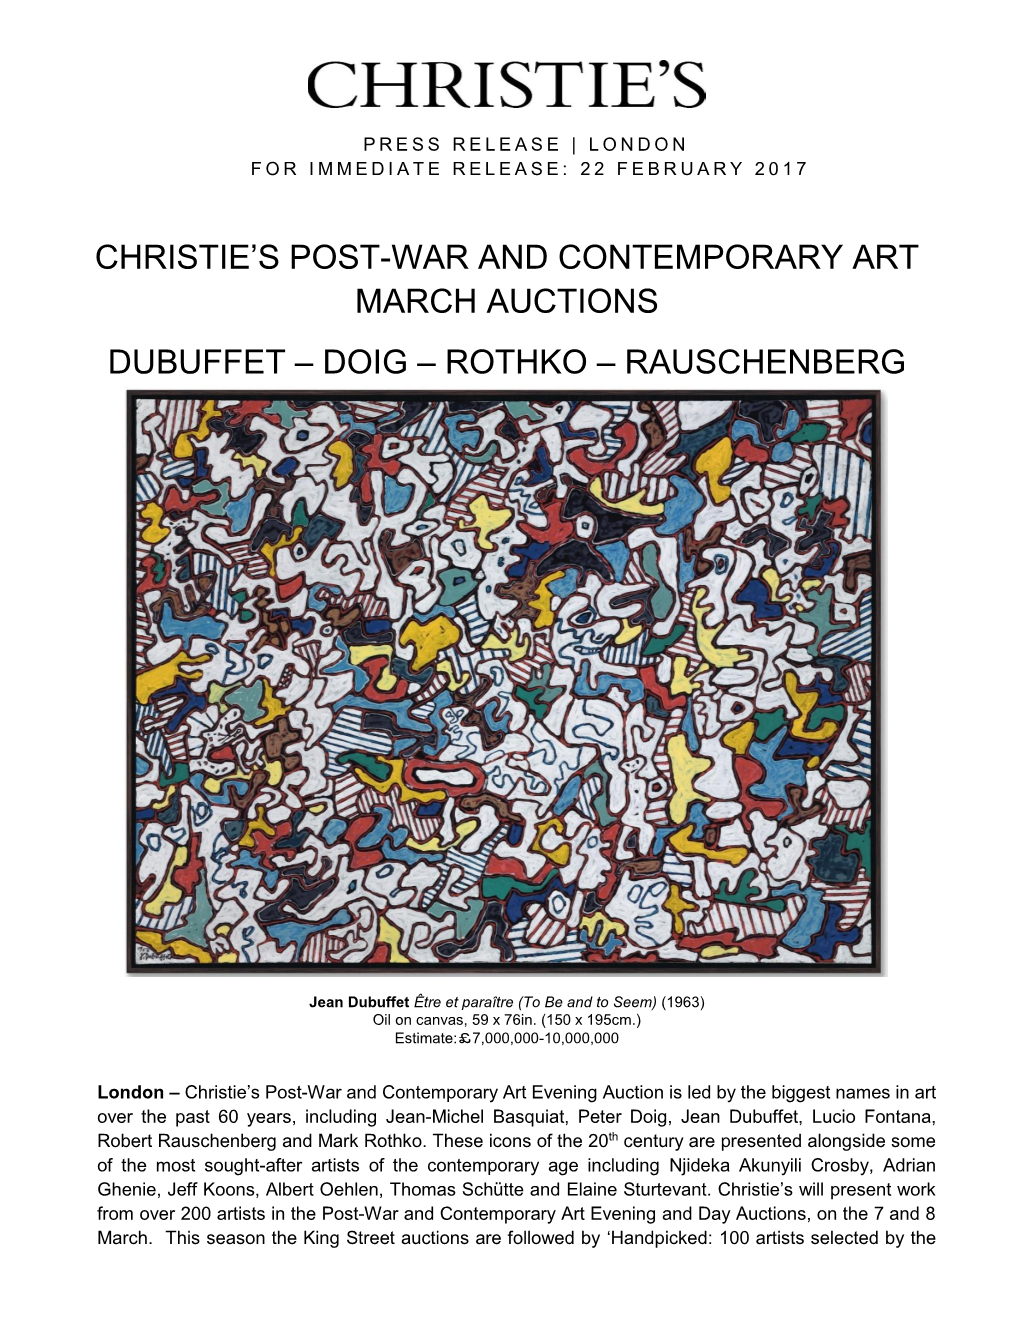 Christie's Post-War and Contemporary Art March Auctions Dubuffet – Doig – Rothko – Rauschenberg